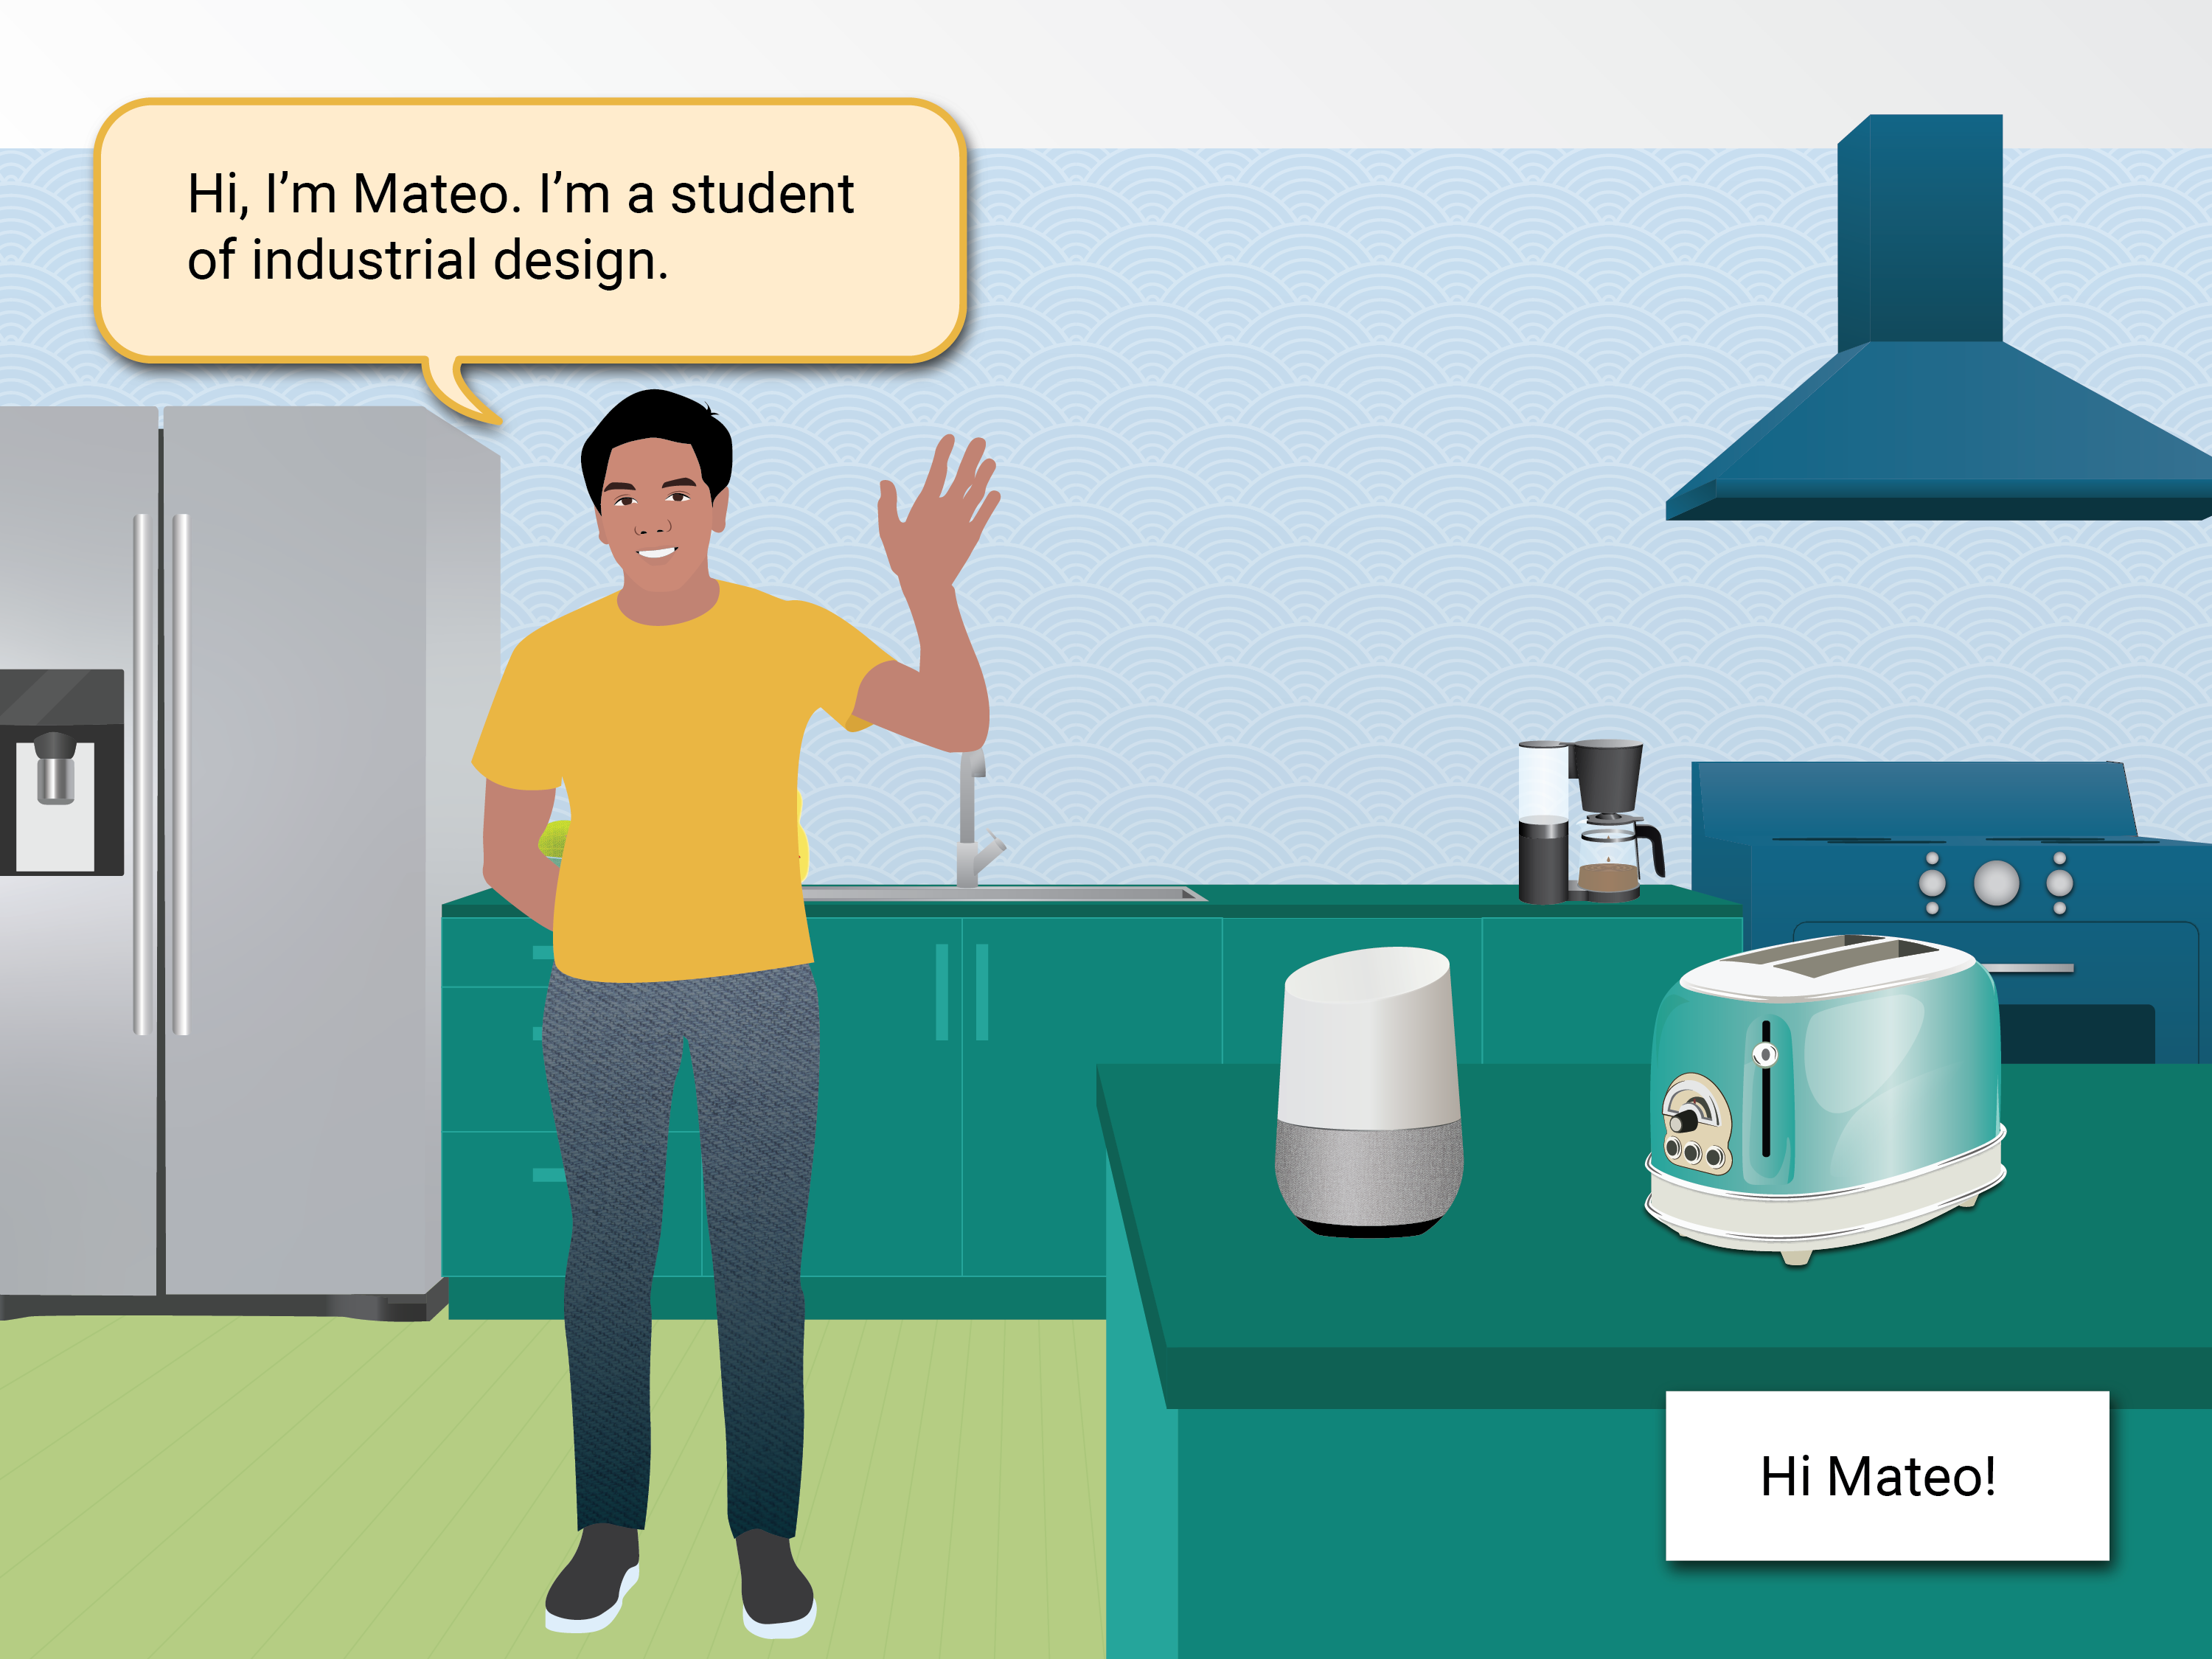 Man waving in the middle of the kitchen. Man says, Hi I’m Mateo, I’m an industrial design student!. Caption says, Hi Mateo!.